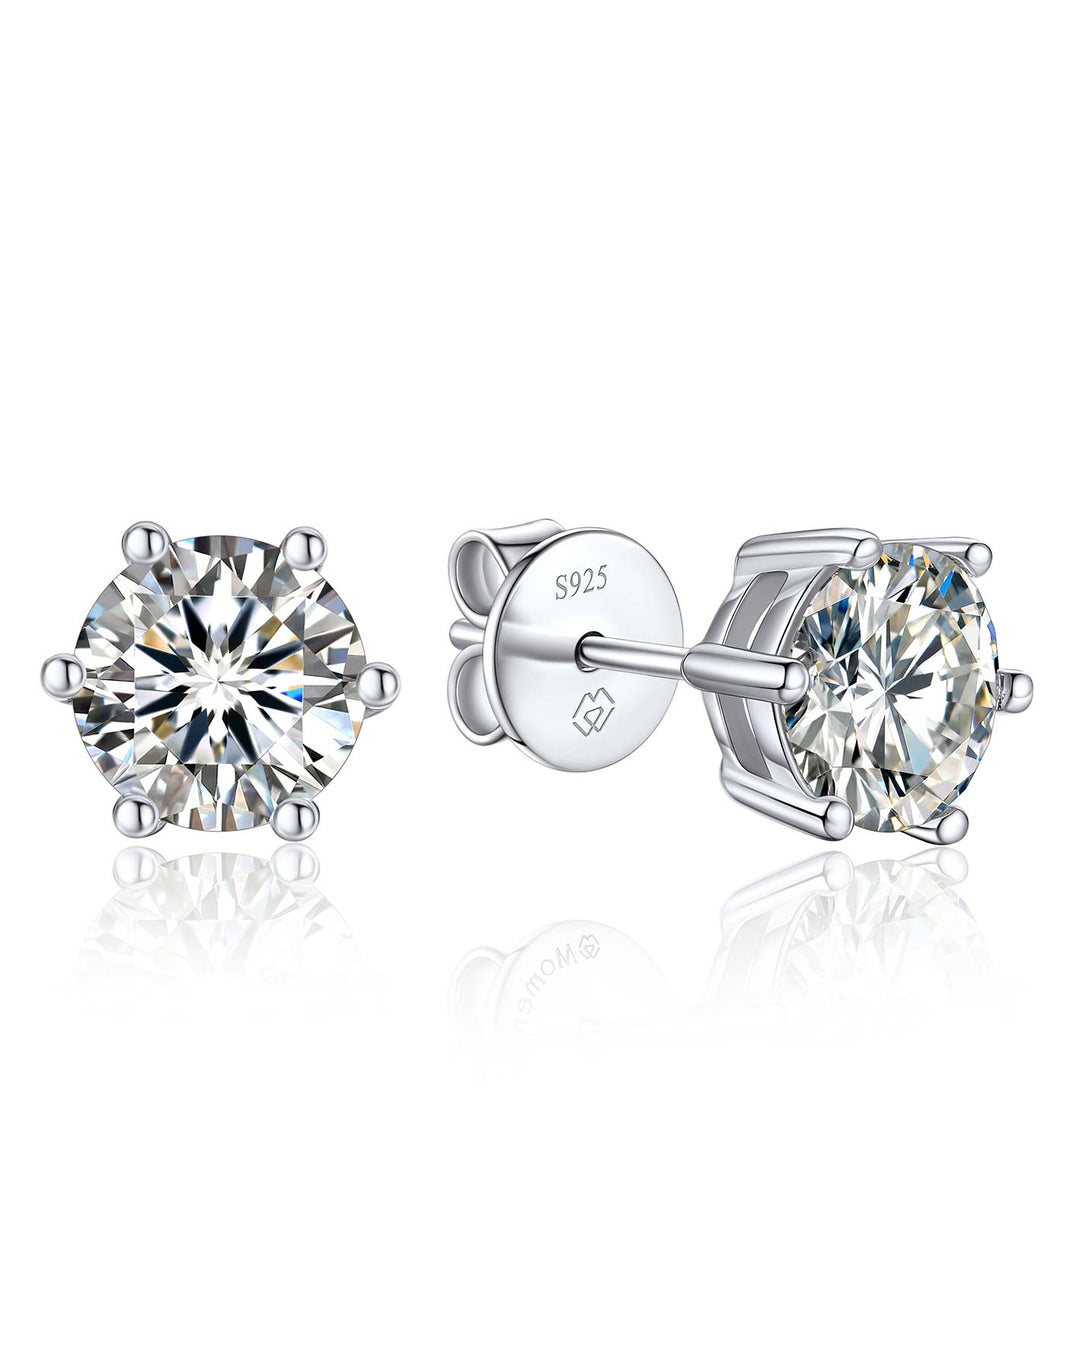 MomentWish Jewelry - Sparking Moissanite Jewelry For Your Love Story